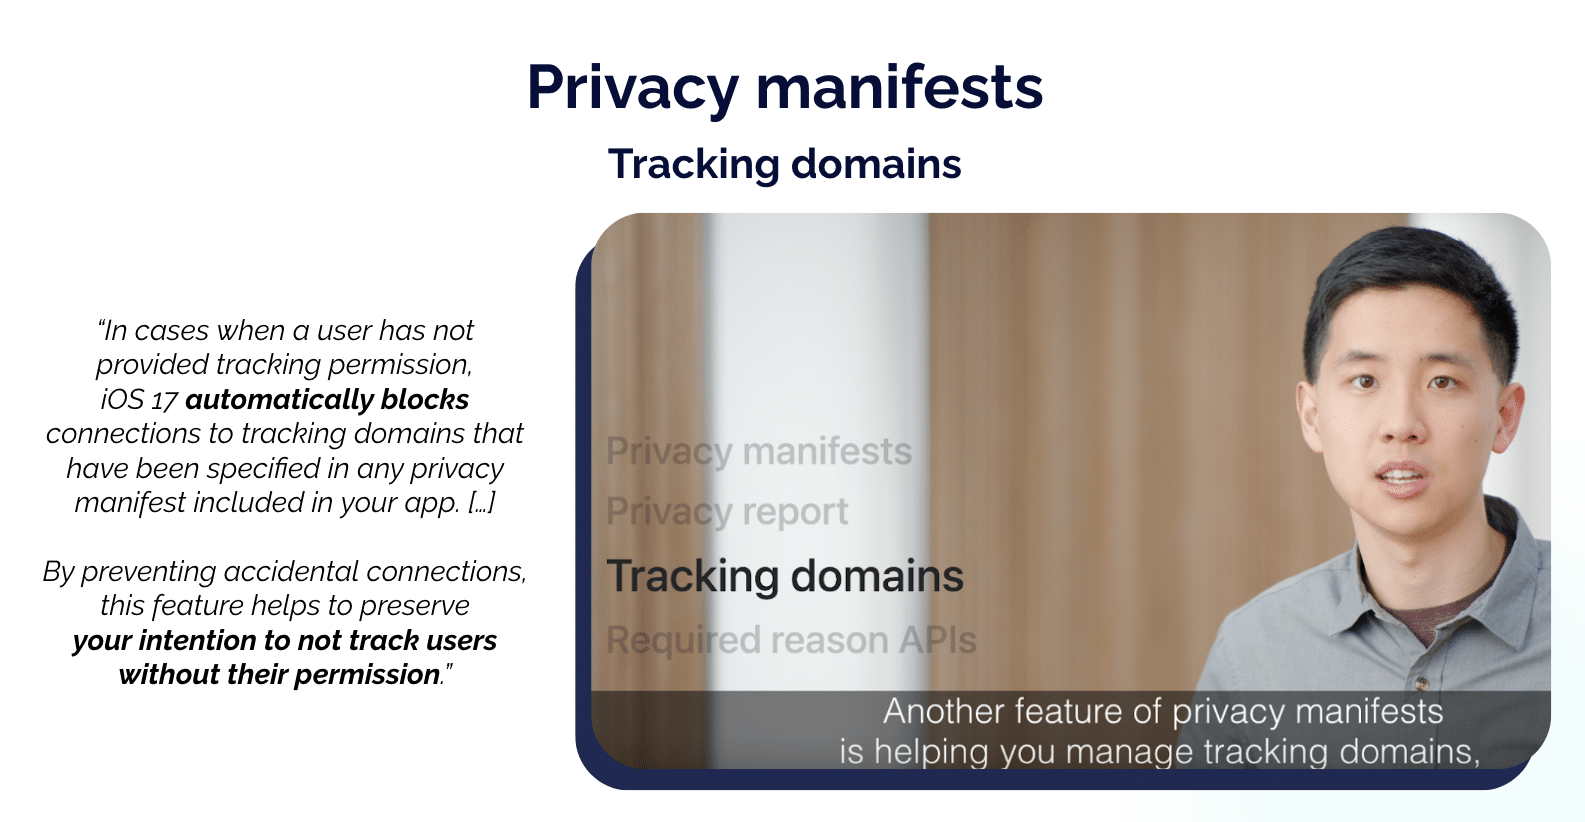 Screenshot of Apple's WWDC 2023 presentation announcing Privacy Manifests. "In cases where a user has not provided tracking permission, iOS 17 automatically blocks connections to tracking domains that have been specified in any privacy manifest included in your app."